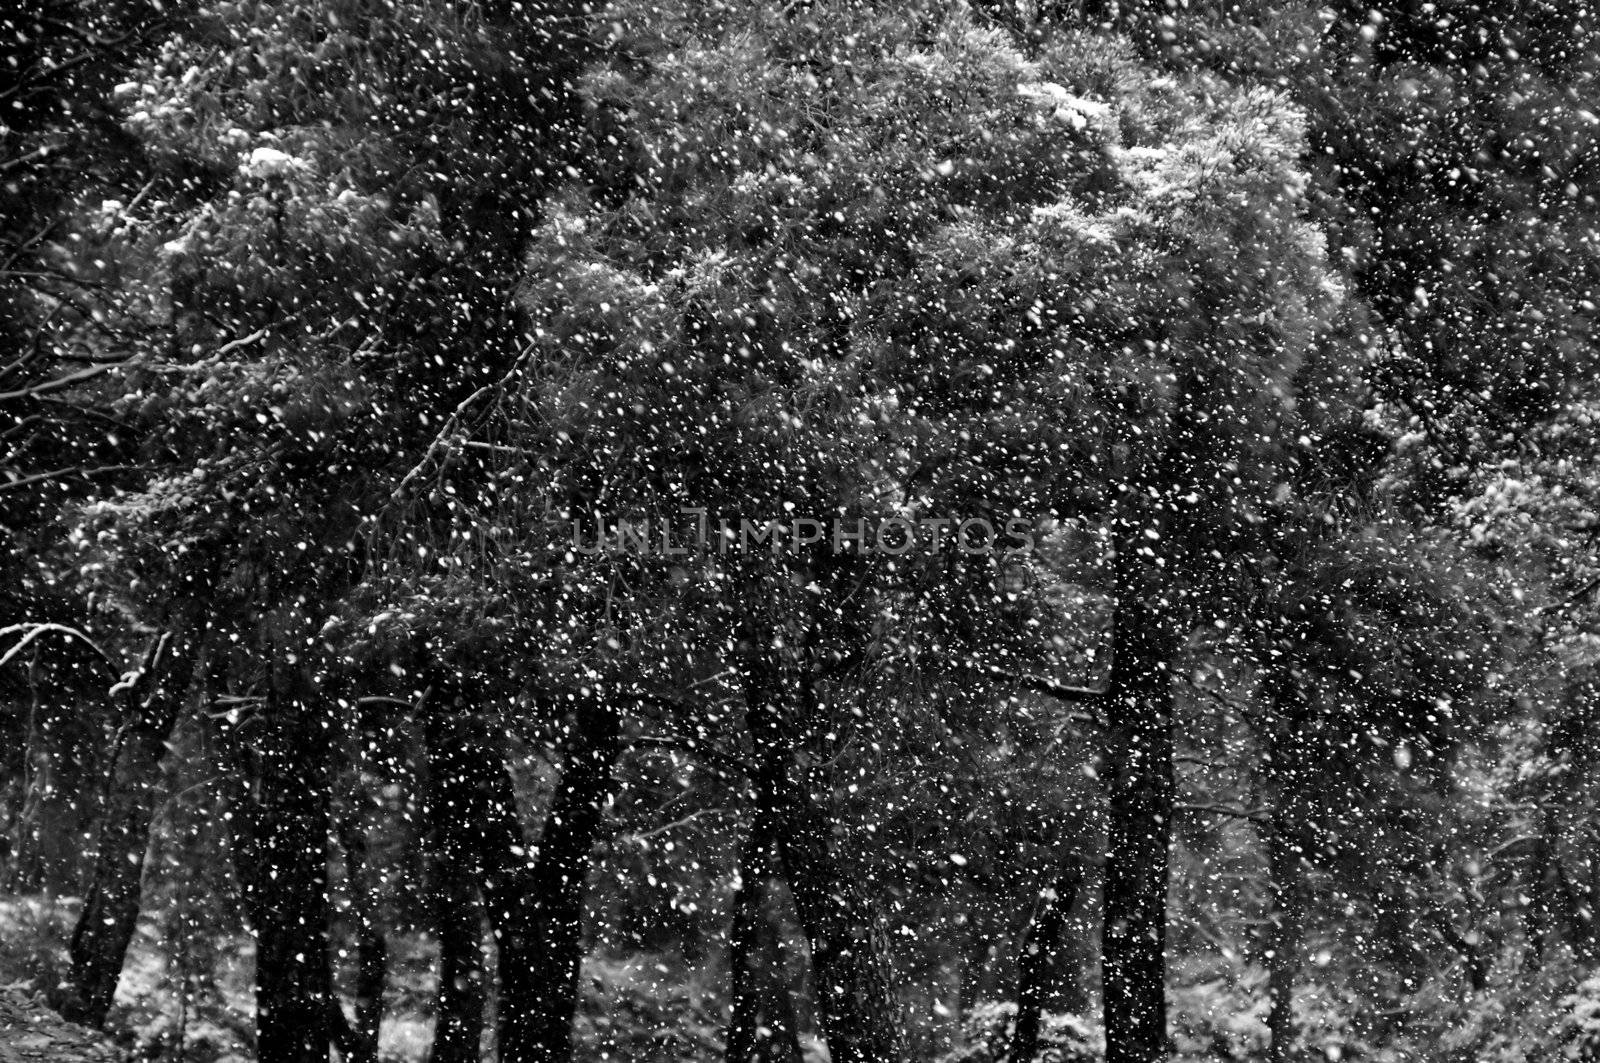 Falling snow storm in pine tree forest. Black and white.